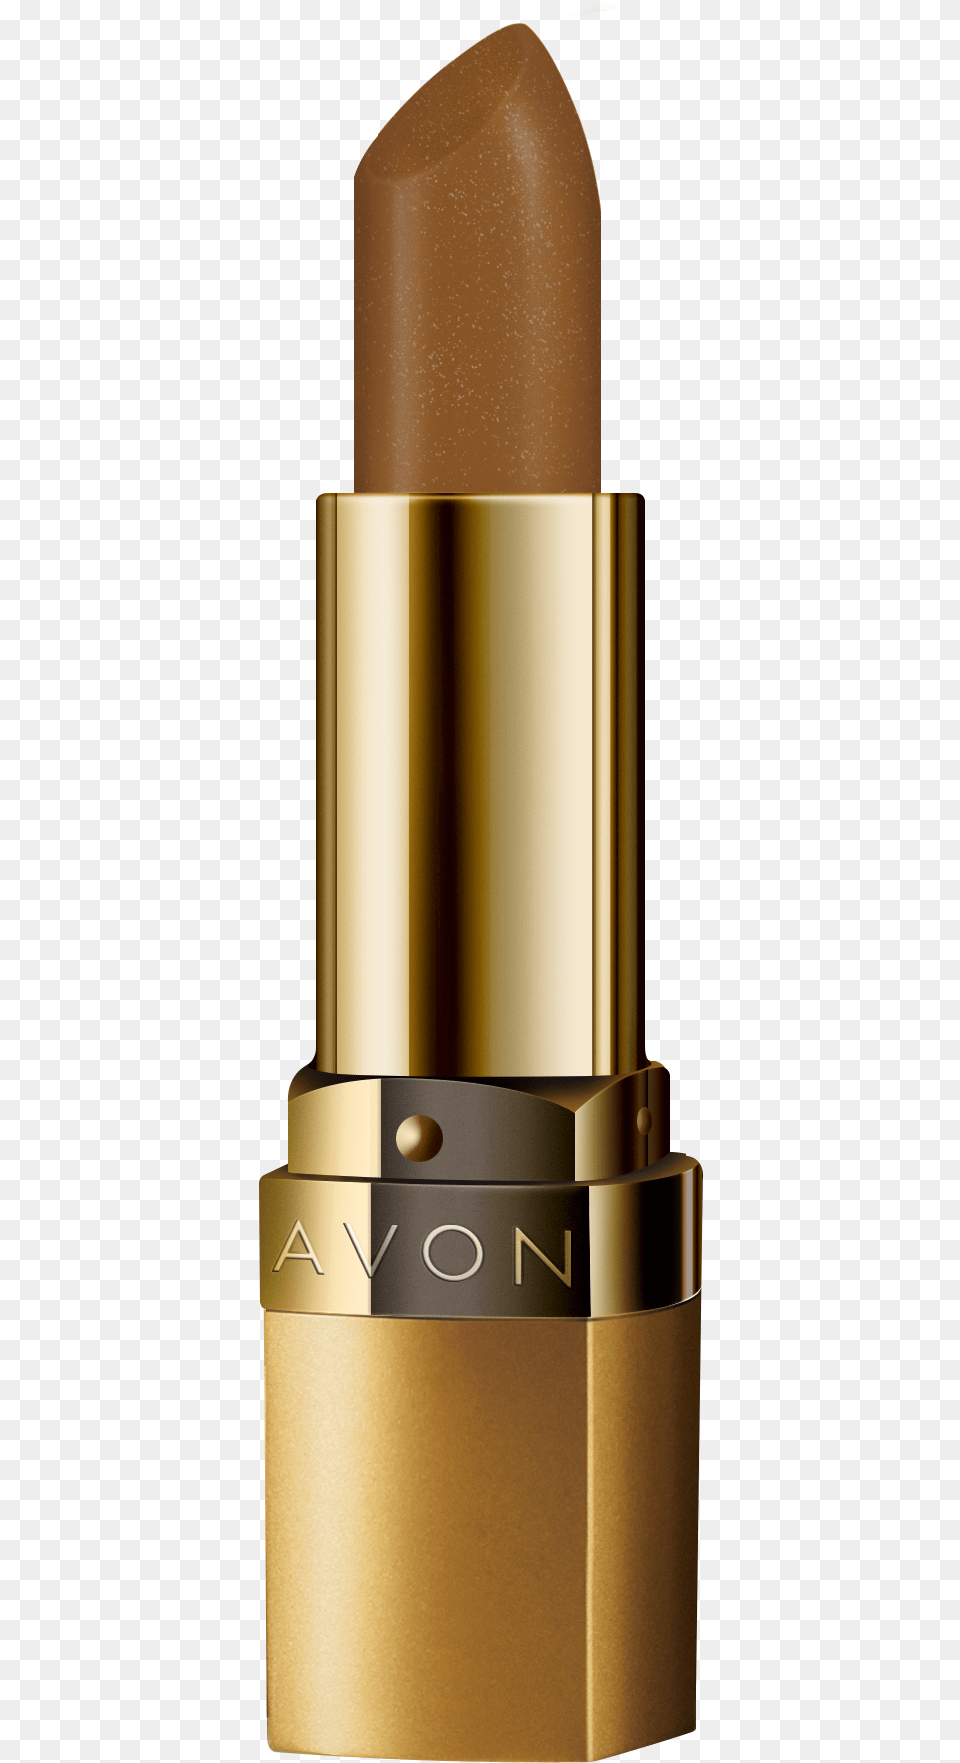 Avon Ultra Color Gold Shine Lipstick, Cosmetics, Candle Png